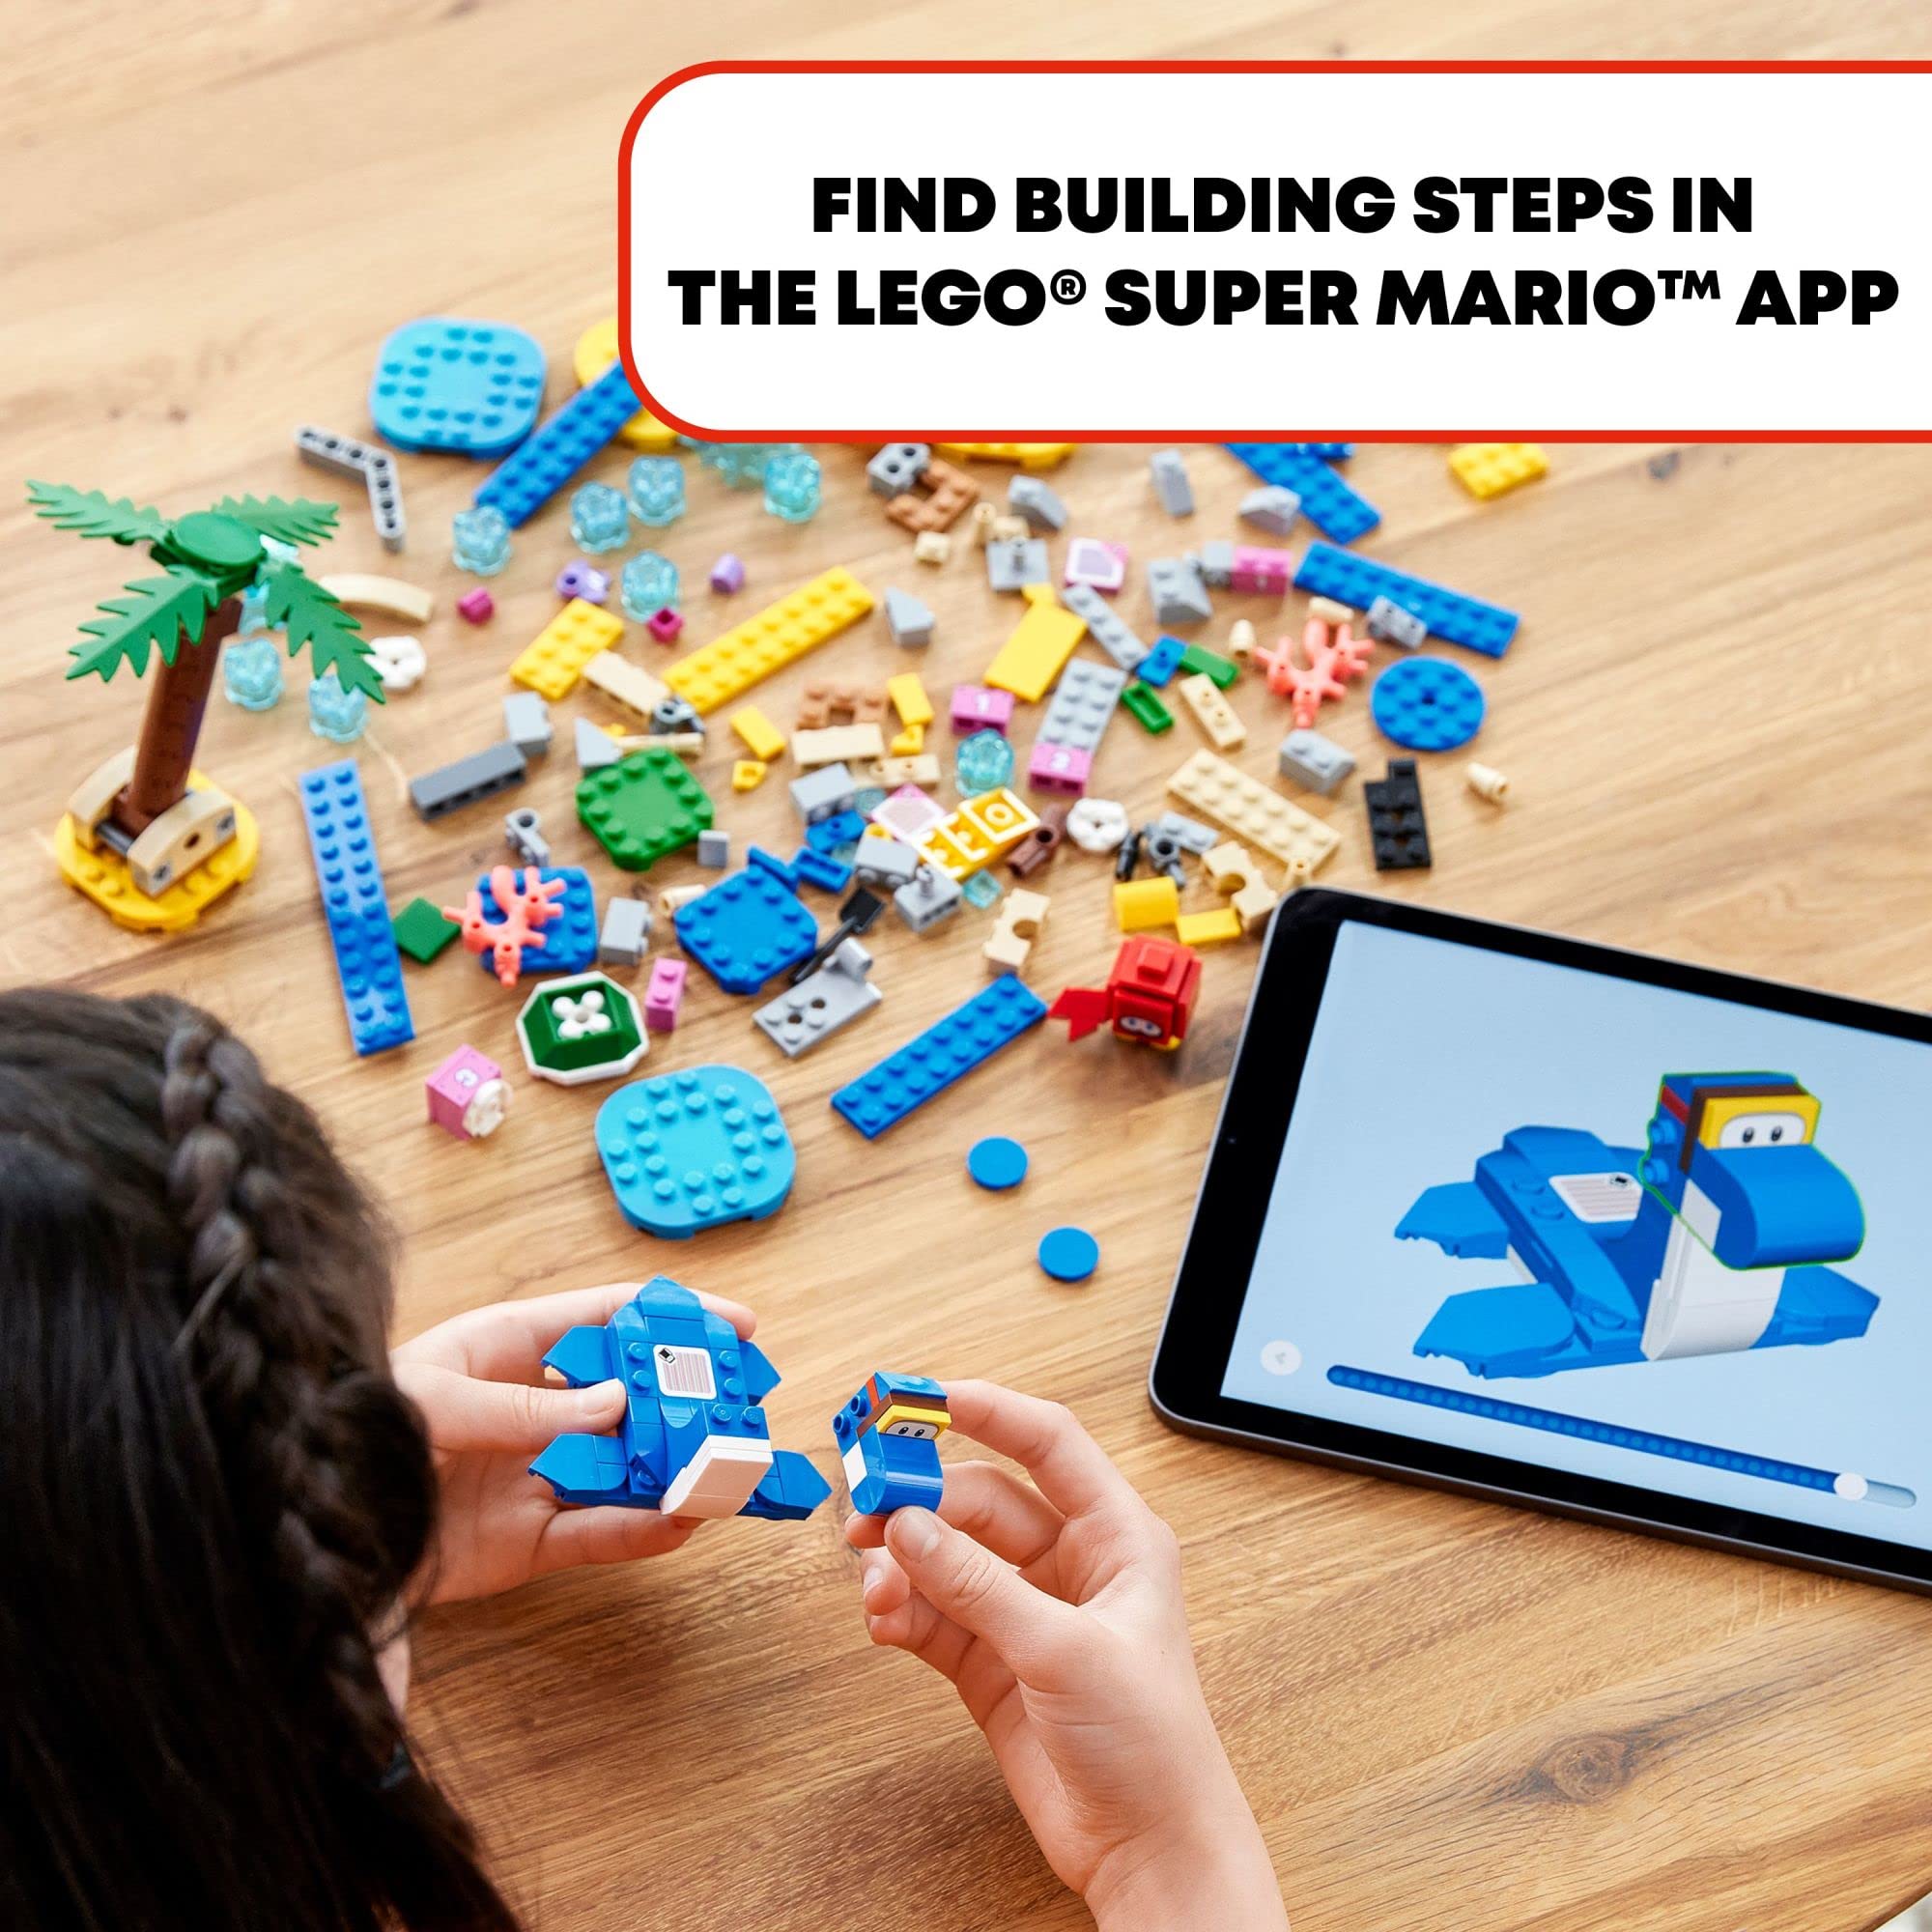 LEGO Super Mario Dorrie’s Beachfront Expansion Set 71398 Building Kit; Collectible Toy for Kids Aged 6 and up (229 Pieces)